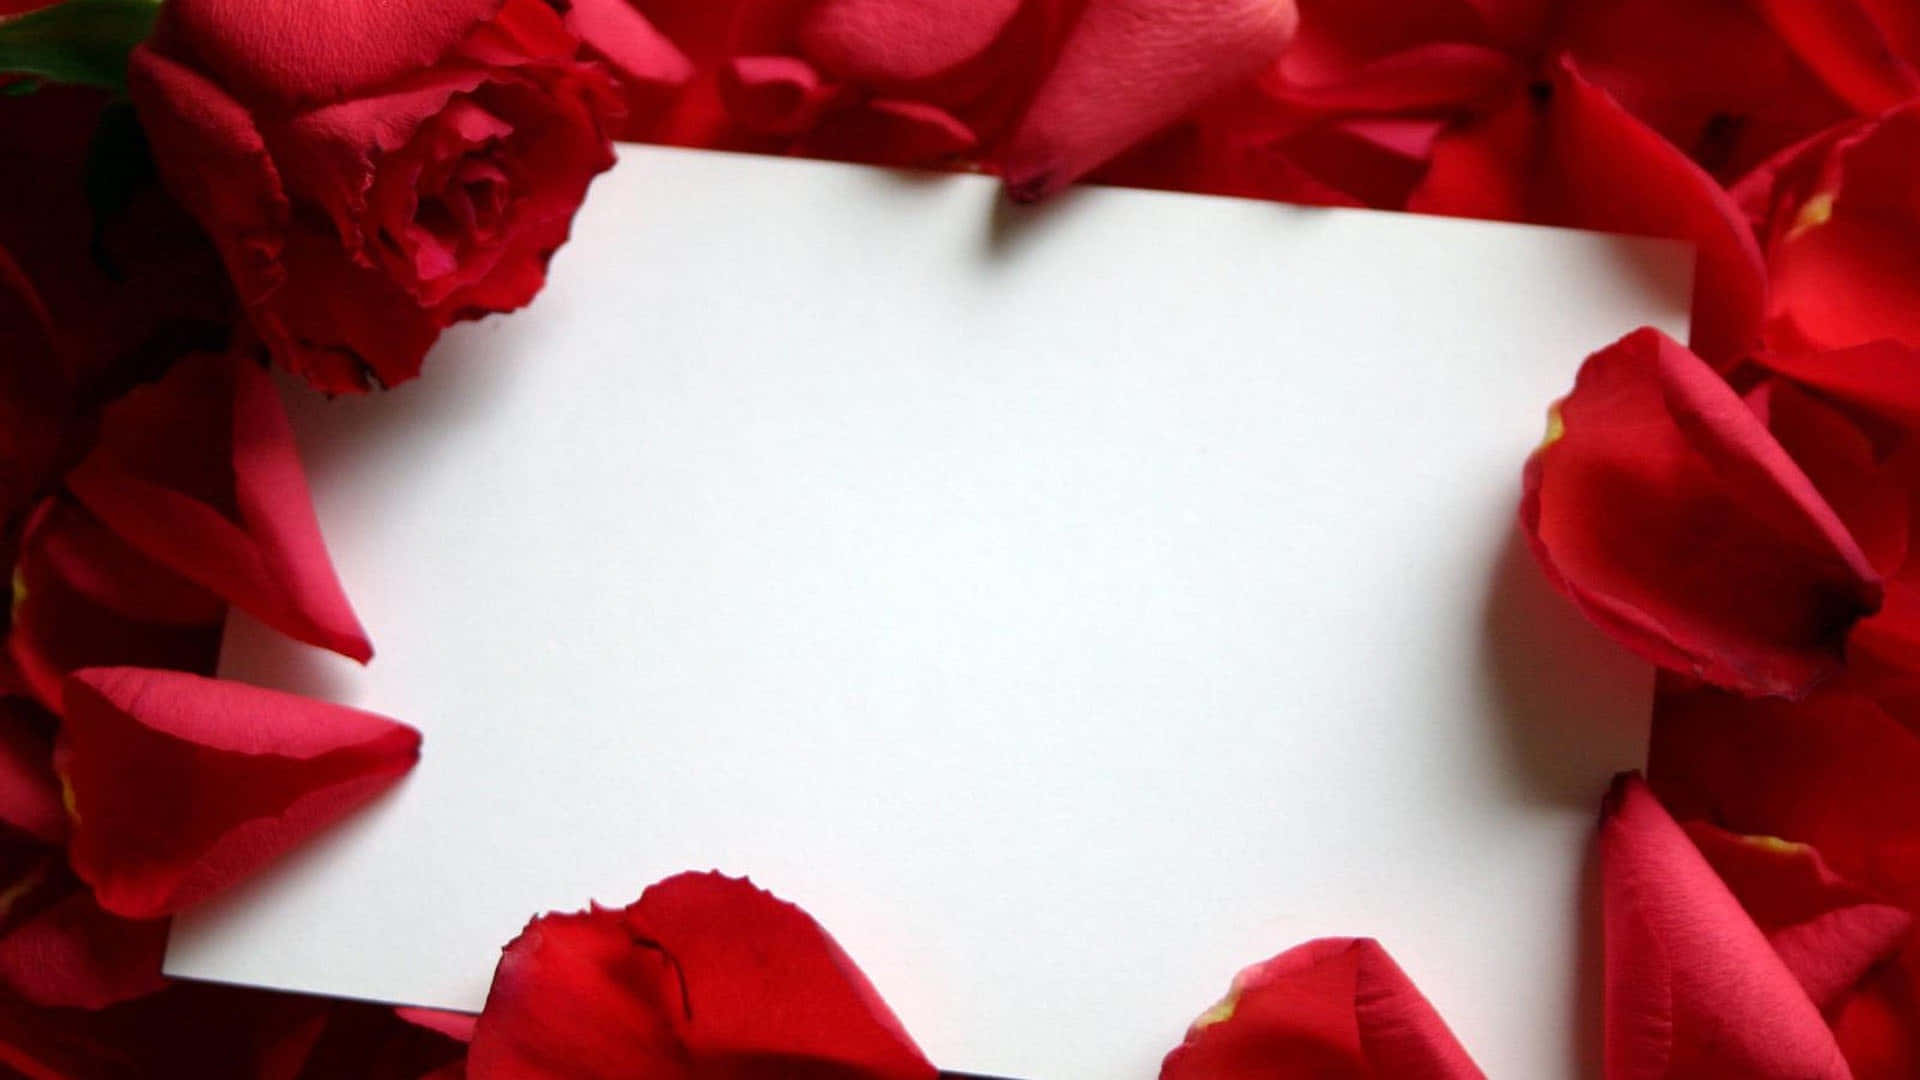 A White Paper Is Surrounded By Red Rose Petals